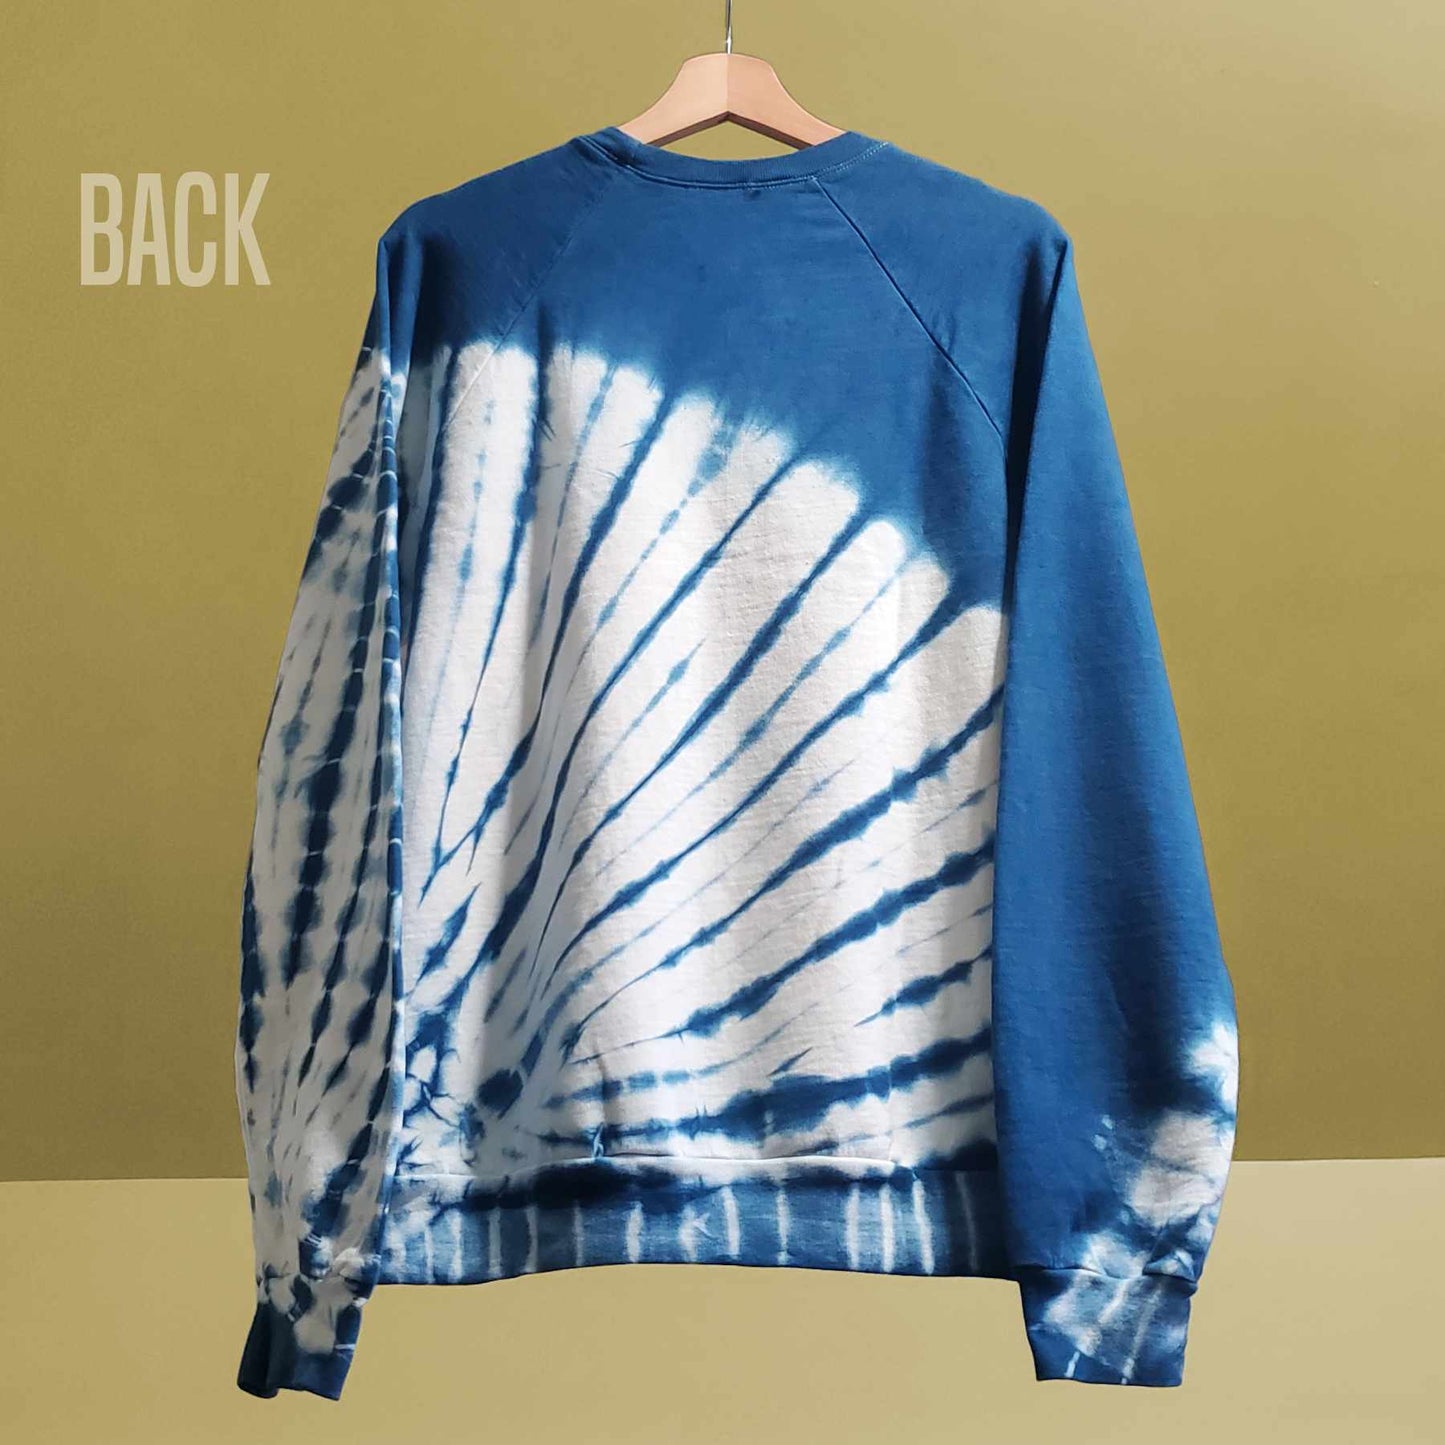 Indigo plant dyes were used to create a starburst pattern on this organic cotton tie-dyed sweatshirt by Rare Breed Organic Apparel.